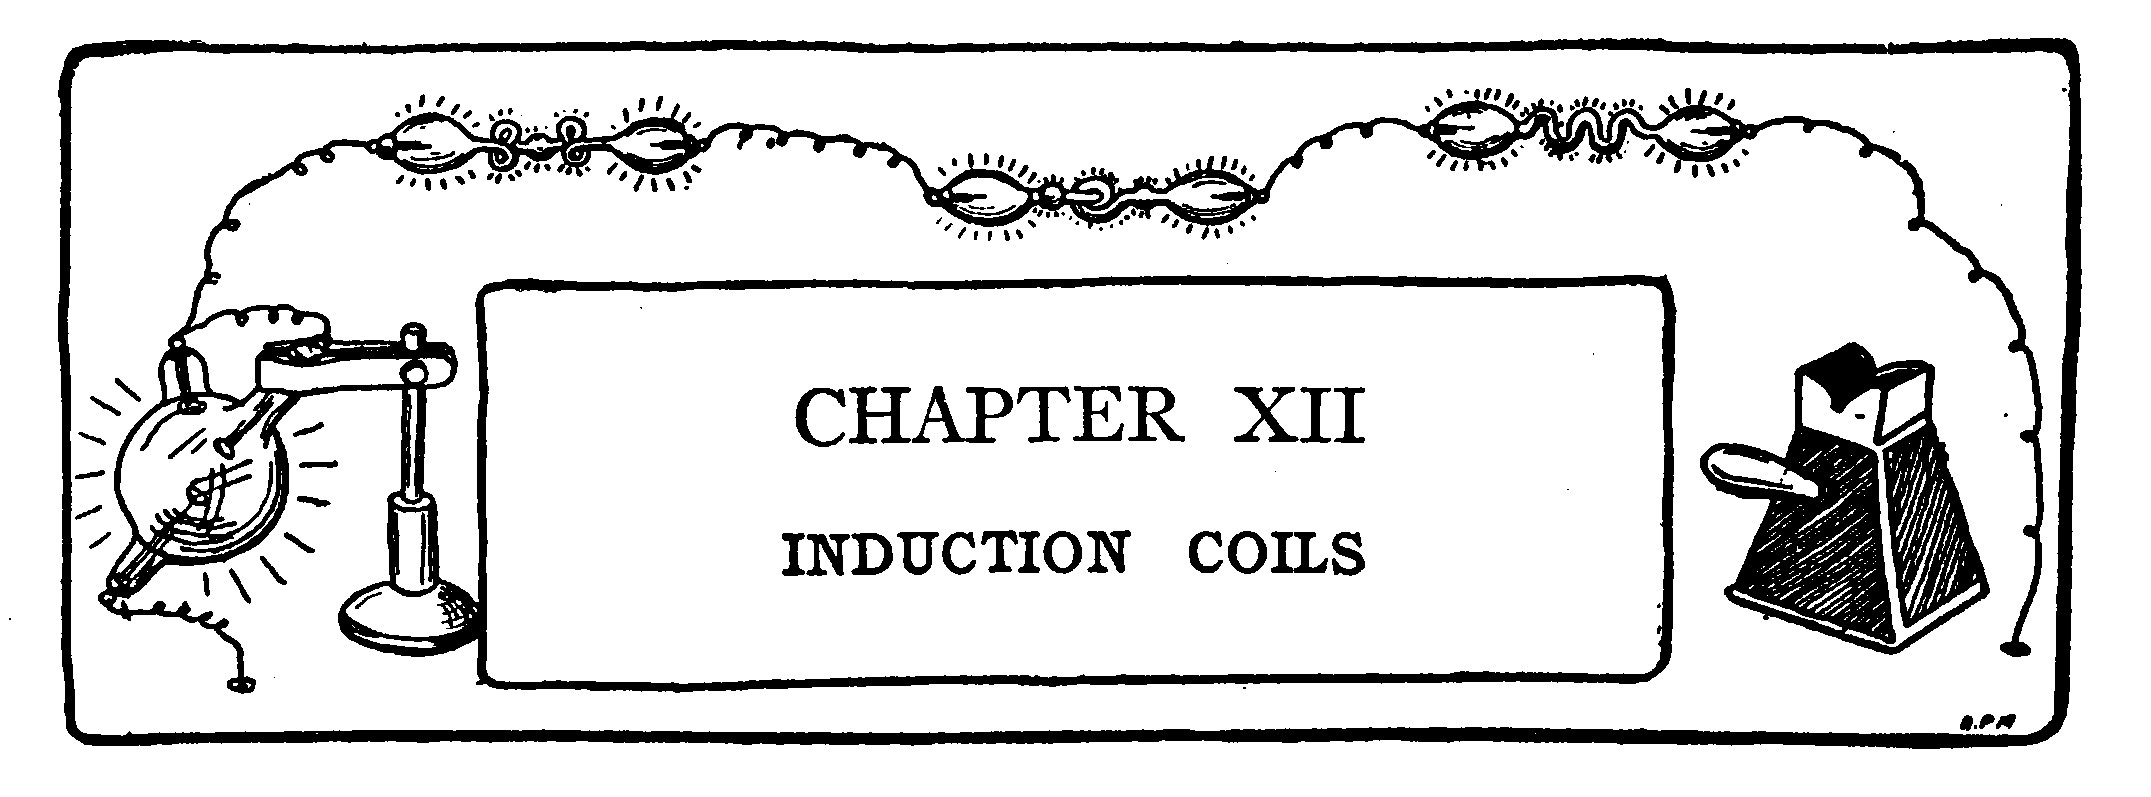 INDUCTION COILS